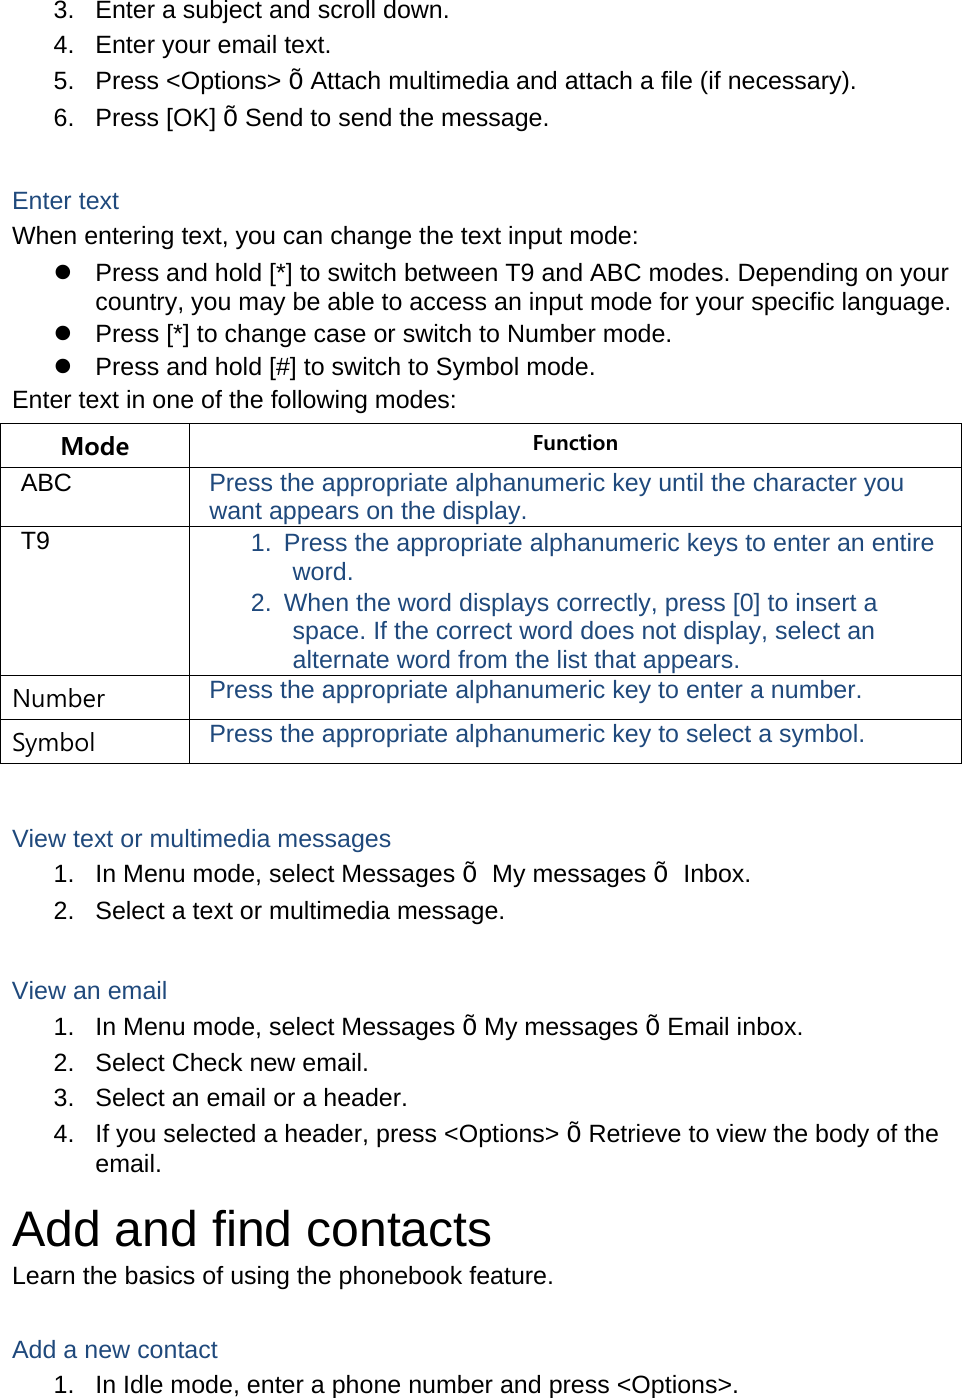 3.  Enter a subject and scroll down. 4.  Enter your email text. 5. Press &lt;Options&gt; Õ Attach multimedia and attach a file (if necessary). 6. Press [OK] Õ Send to send the message.  Enter text When entering text, you can change the text input mode:   Press and hold [*] to switch between T9 and ABC modes. Depending on your country, you may be able to access an input mode for your specific language.   Press [*] to change case or switch to Number mode.   Press and hold [#] to switch to Symbol mode. Enter text in one of the following modes: Mode  Function ABC  Press the appropriate alphanumeric key until the character you want appears on the display. T9  1.  Press the appropriate alphanumeric keys to enter an entire word. 2.  When the word displays correctly, press [0] to insert a space. If the correct word does not display, select an alternate word from the list that appears. Number  Press the appropriate alphanumeric key to enter a number. Symbol  Press the appropriate alphanumeric key to select a symbol.  View text or multimedia messages 1.  In Menu mode, select Messages Õ My messages Õ Inbox. 2.  Select a text or multimedia message.  View an email 1.  In Menu mode, select Messages Õ My messages Õ Email inbox. 2.  Select Check new email. 3.  Select an email or a header. 4.  If you selected a header, press &lt;Options&gt; Õ Retrieve to view the body of the email. Add and find contacts Learn the basics of using the phonebook feature.  Add a new contact 1.  In Idle mode, enter a phone number and press &lt;Options&gt;. 